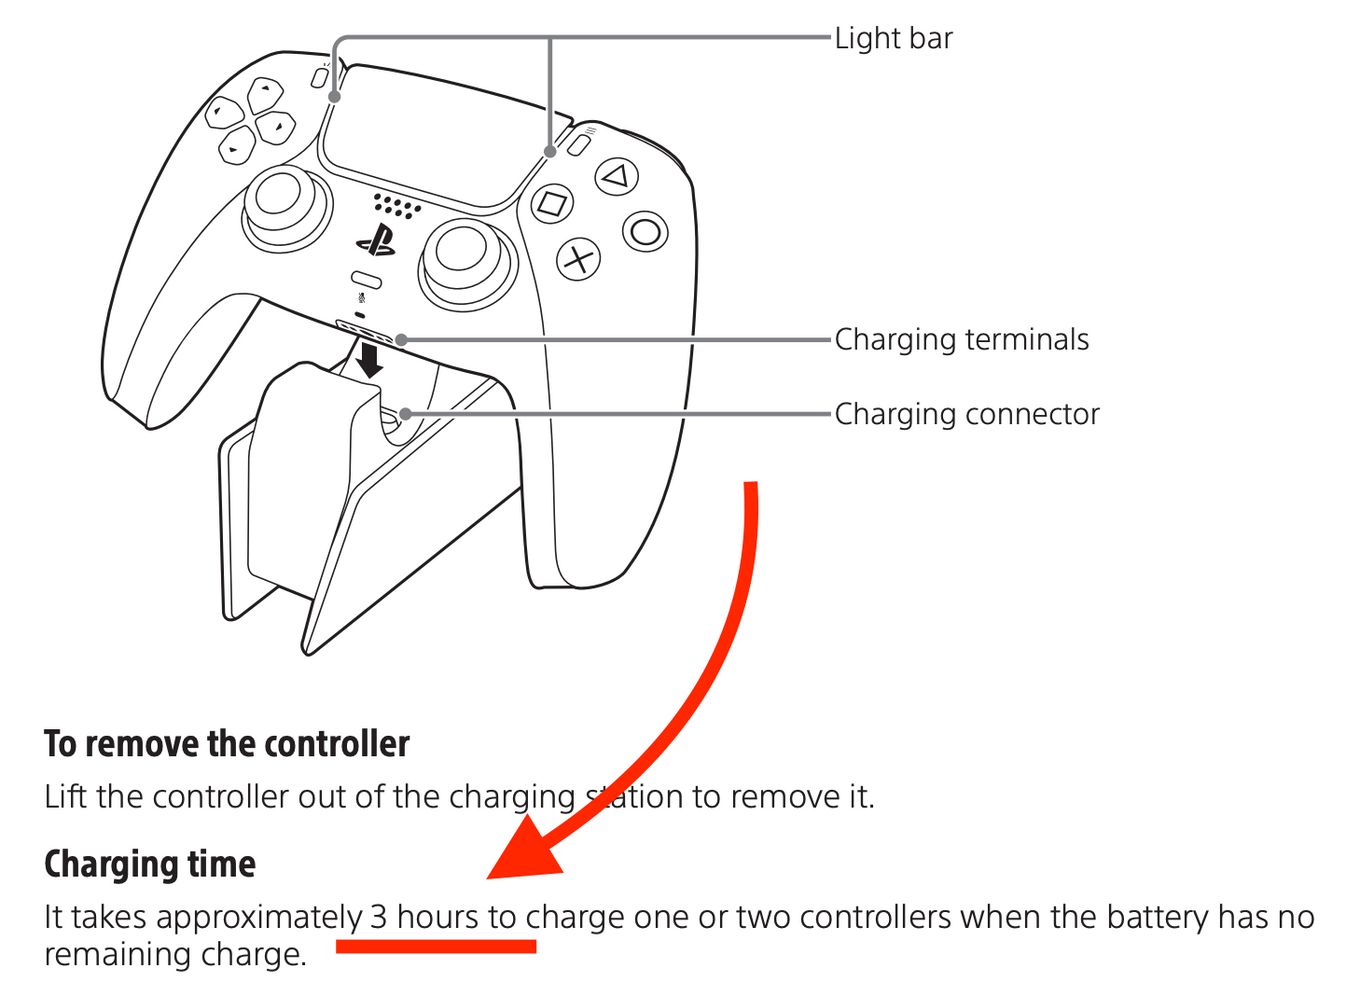 PS5 controller battery life, and how to make it last longer